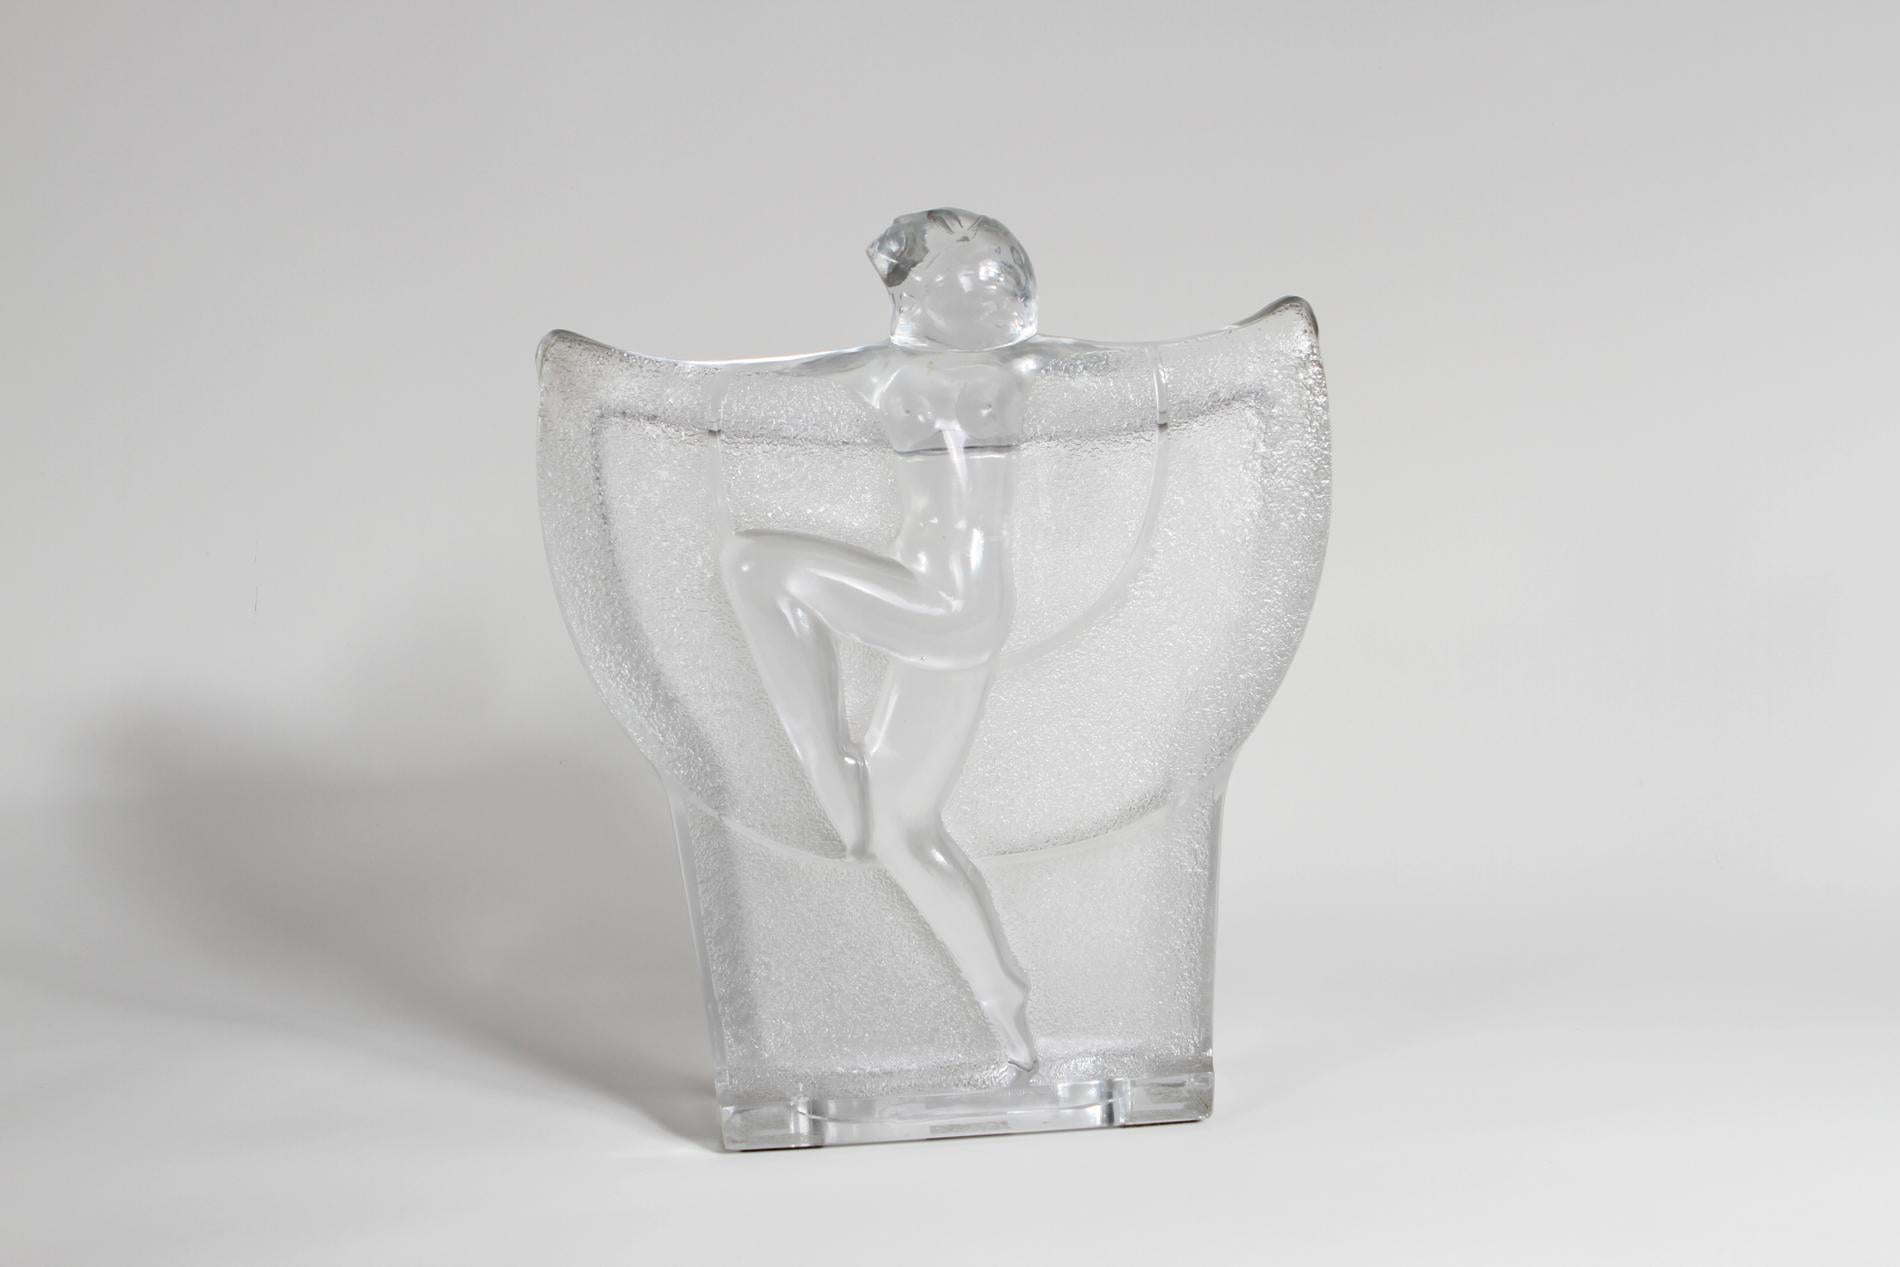 French Art Deco sculpture in all glass representing a feminine figure dancing made by Edouard Cazaux & David Guéron in 1930. The subject represented is typical from the time, the particularity of the sculpture is the technique which is pressed